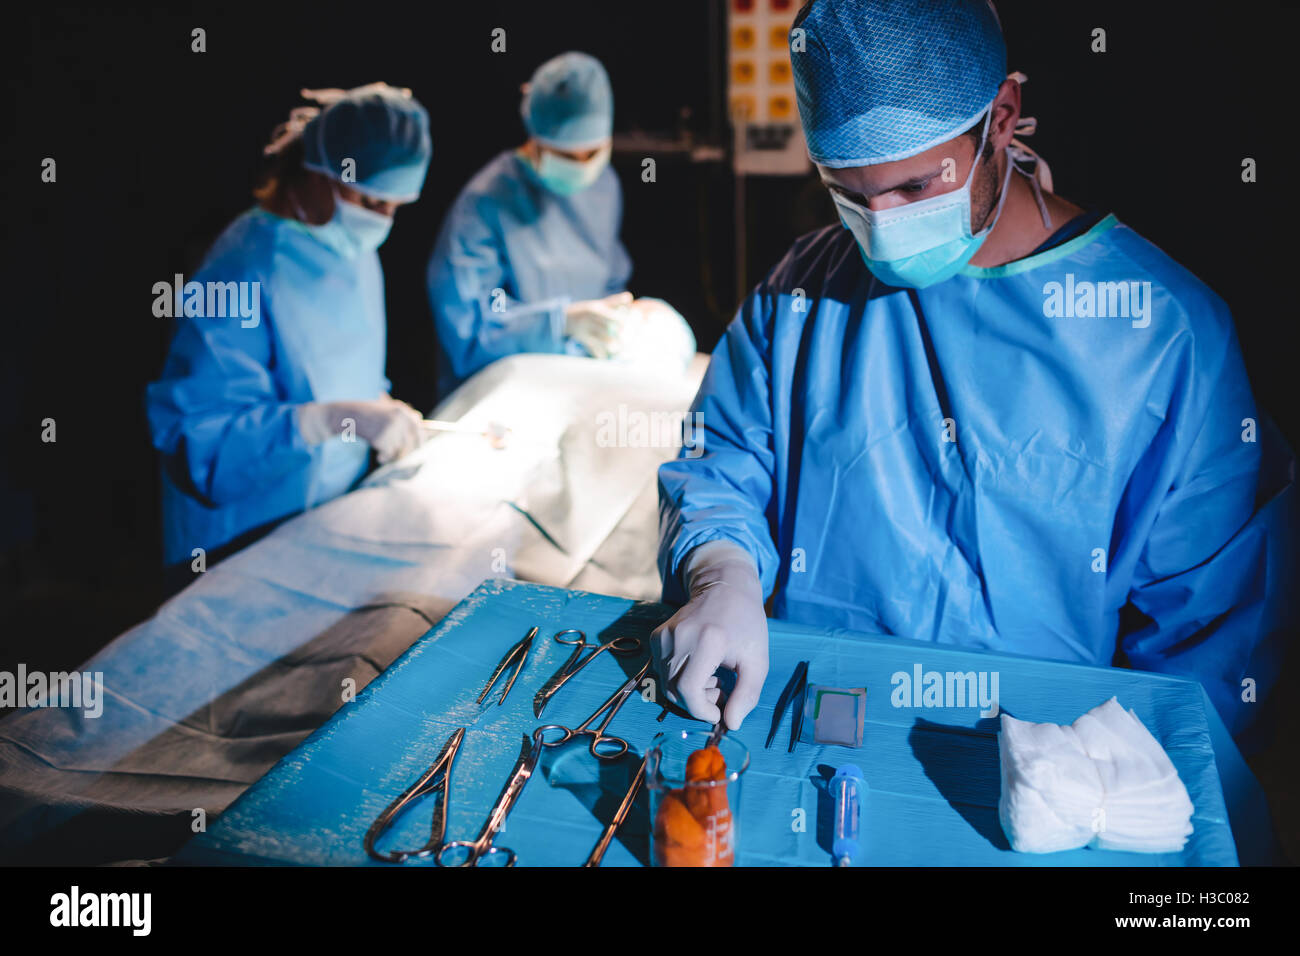 Surgeon taking a scissors from tray Stock Photo